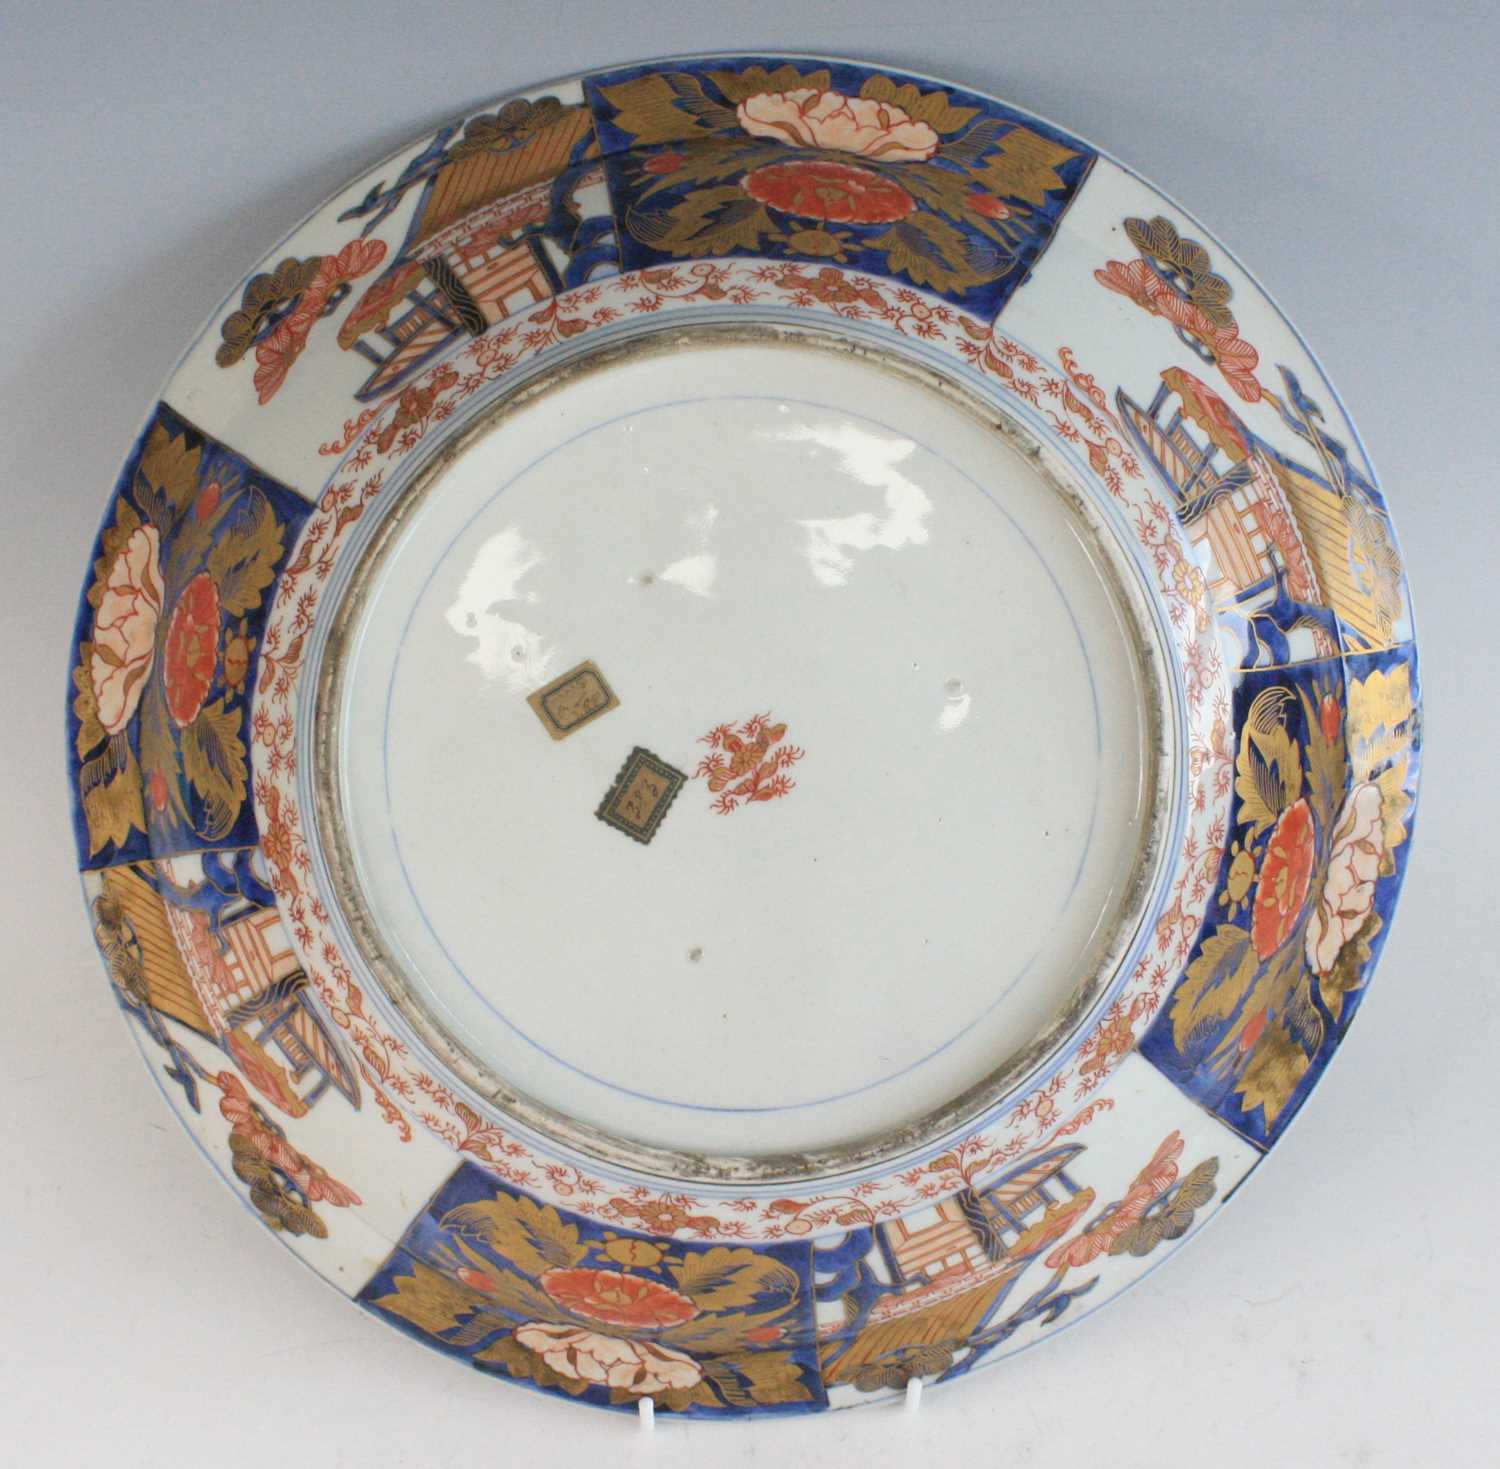 A Japanese Imari porcelain charger, 18th century, decorated with a basket of flowers within a border - Image 3 of 4